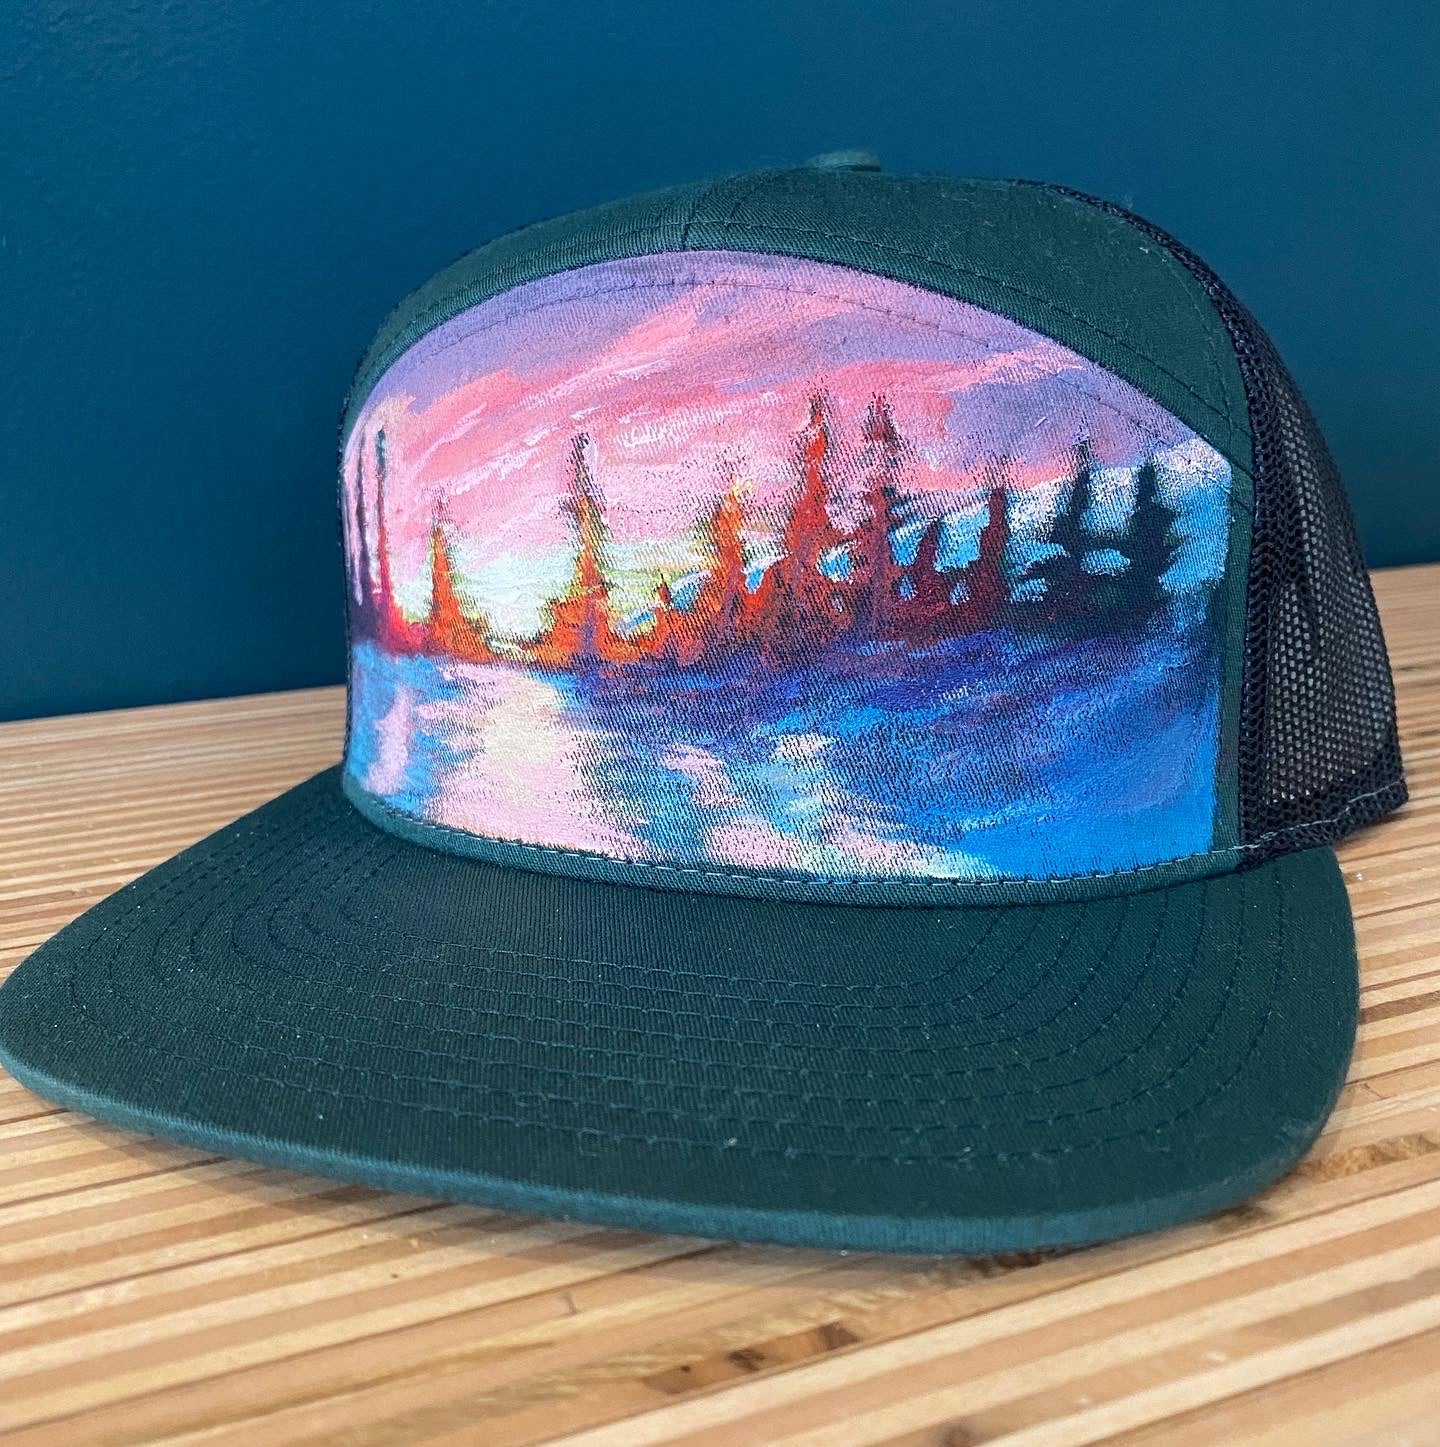 "Pine Glow" Hand Painted Hat